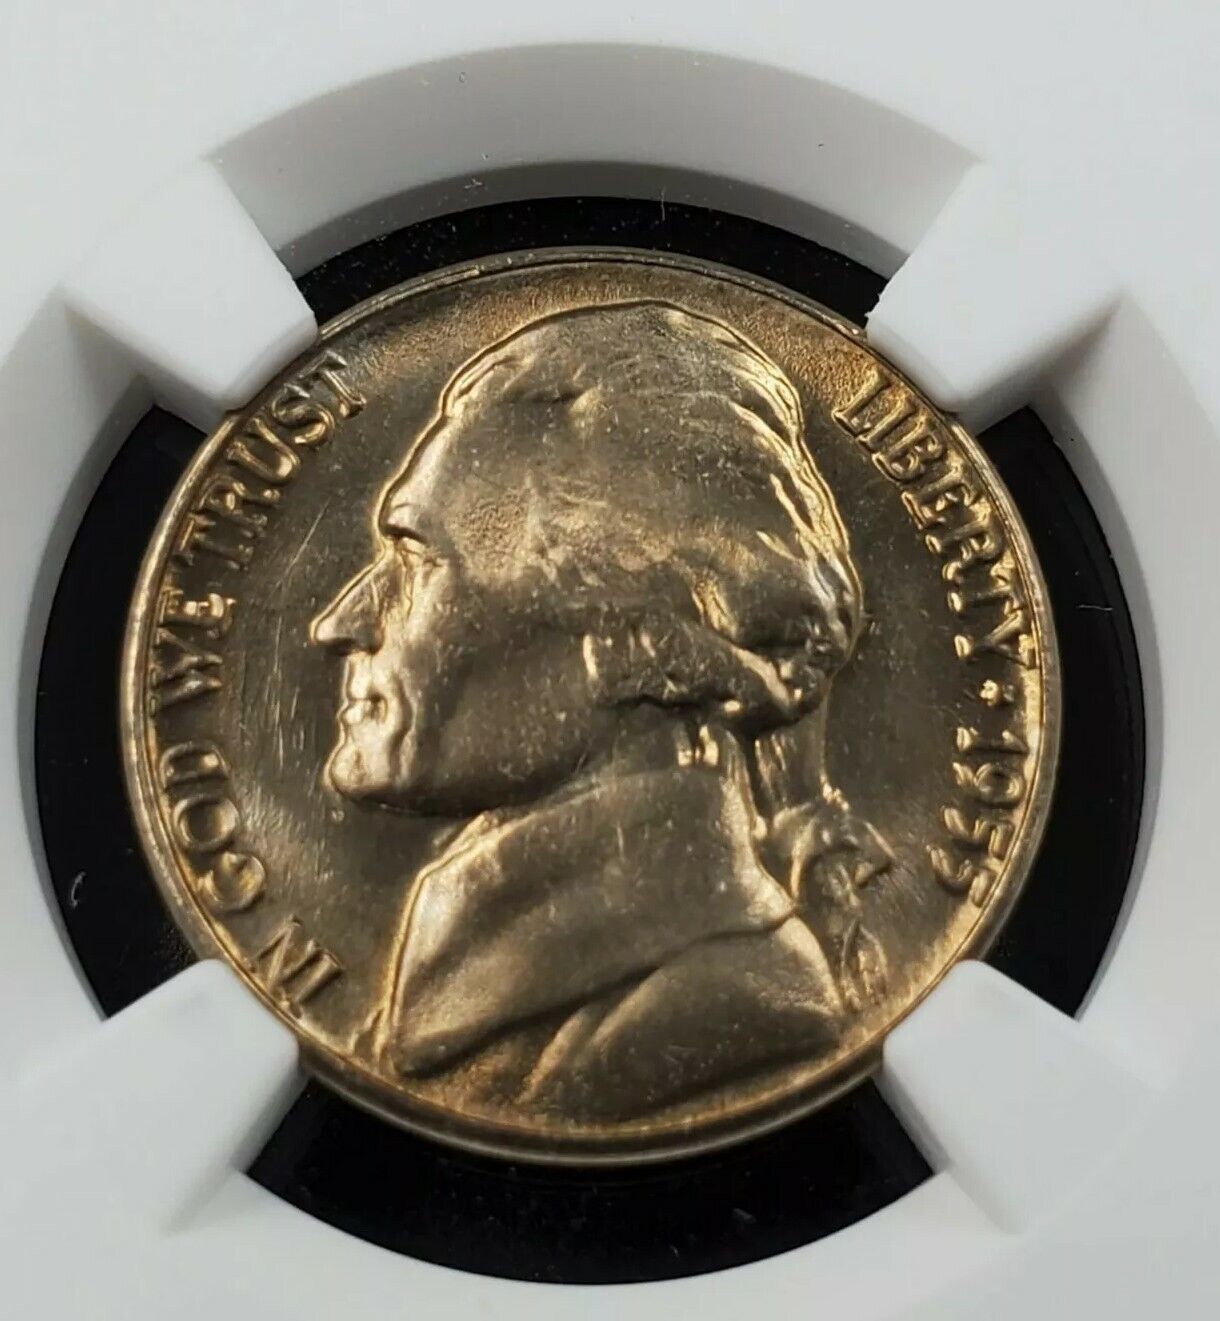 1955 D/S Jefferson Nickel Coin NEW NGC MS66 OVER MINT MARK KEY VARIETY GEM BU